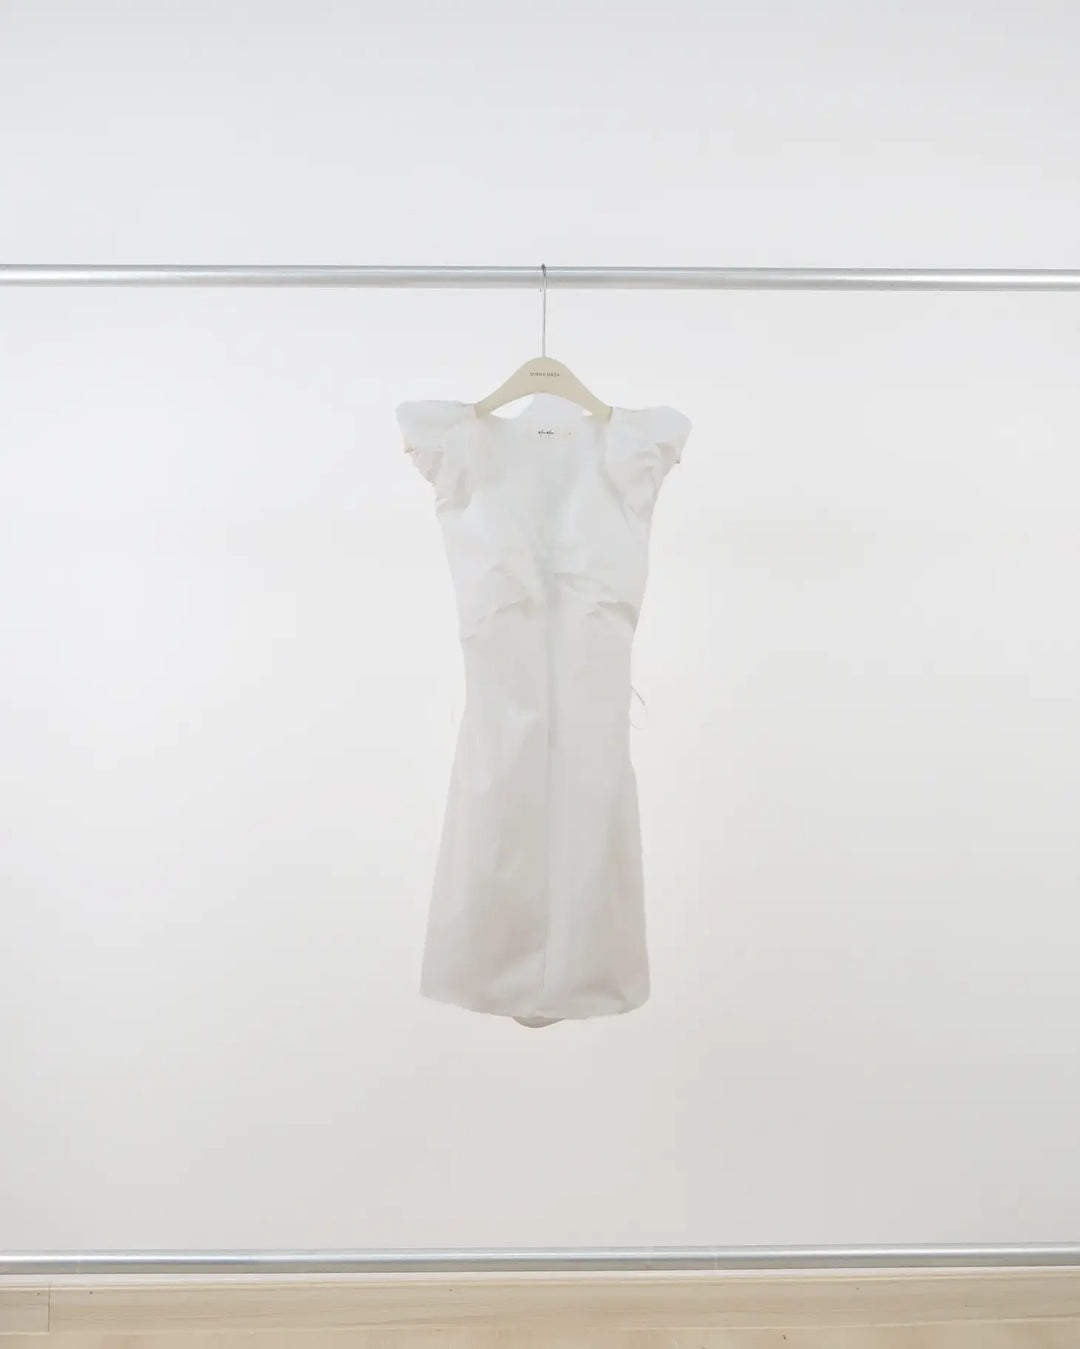 An image of a  White-One-Size 19659 Short Dress by  Mirra Masa